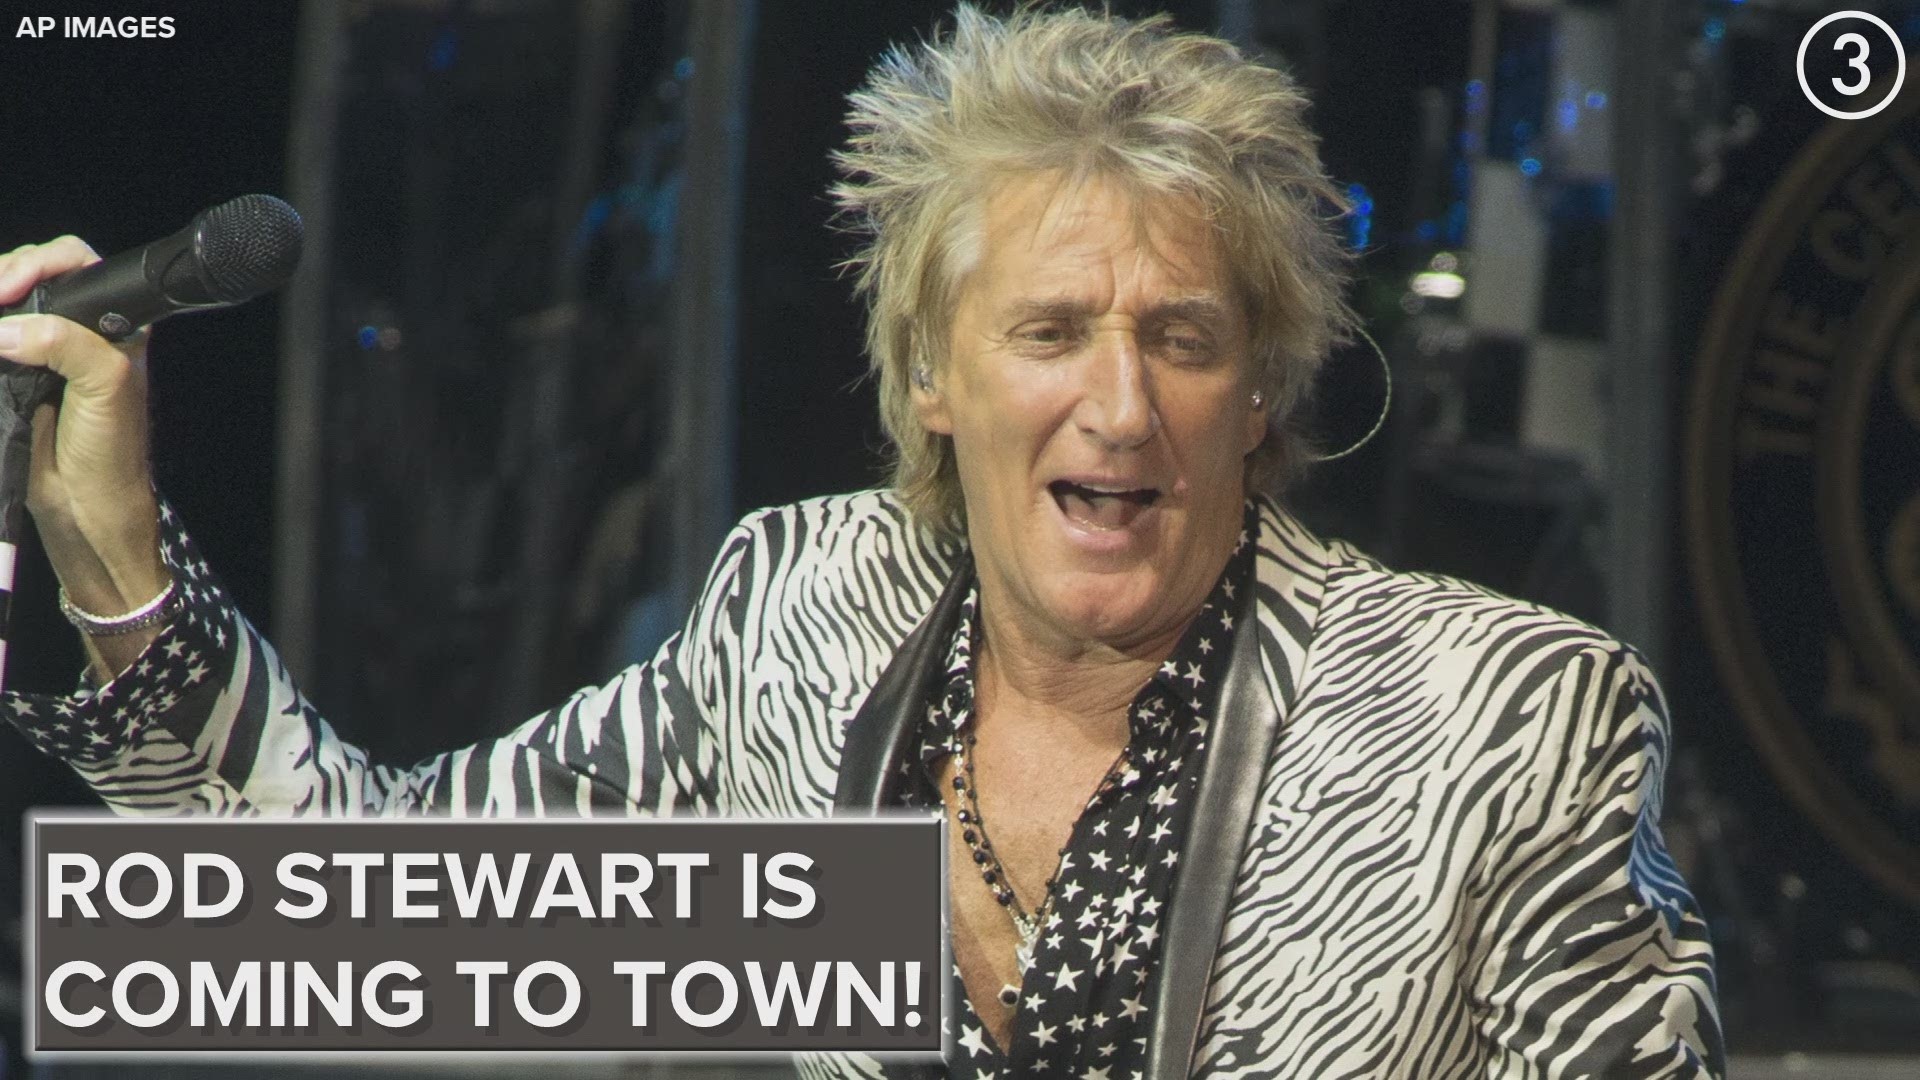 Get ready to rock!  Rod Stewart is coming to town!